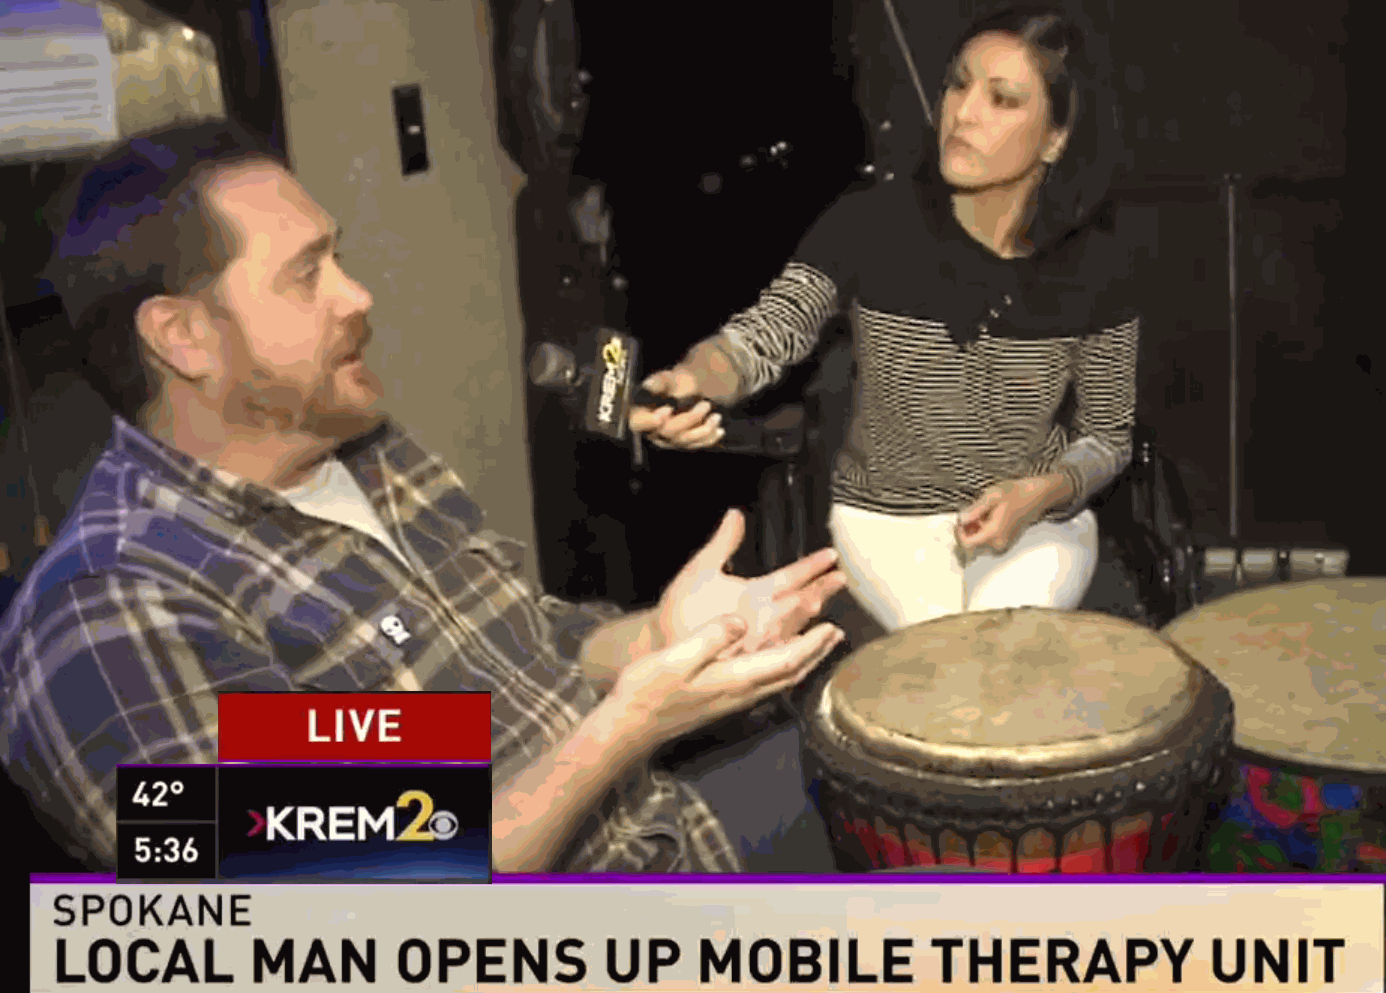 Videos: KREM2 News: Hawke Robinson introduces the wheelchair accessible mobile therapy facility RPG Trailer